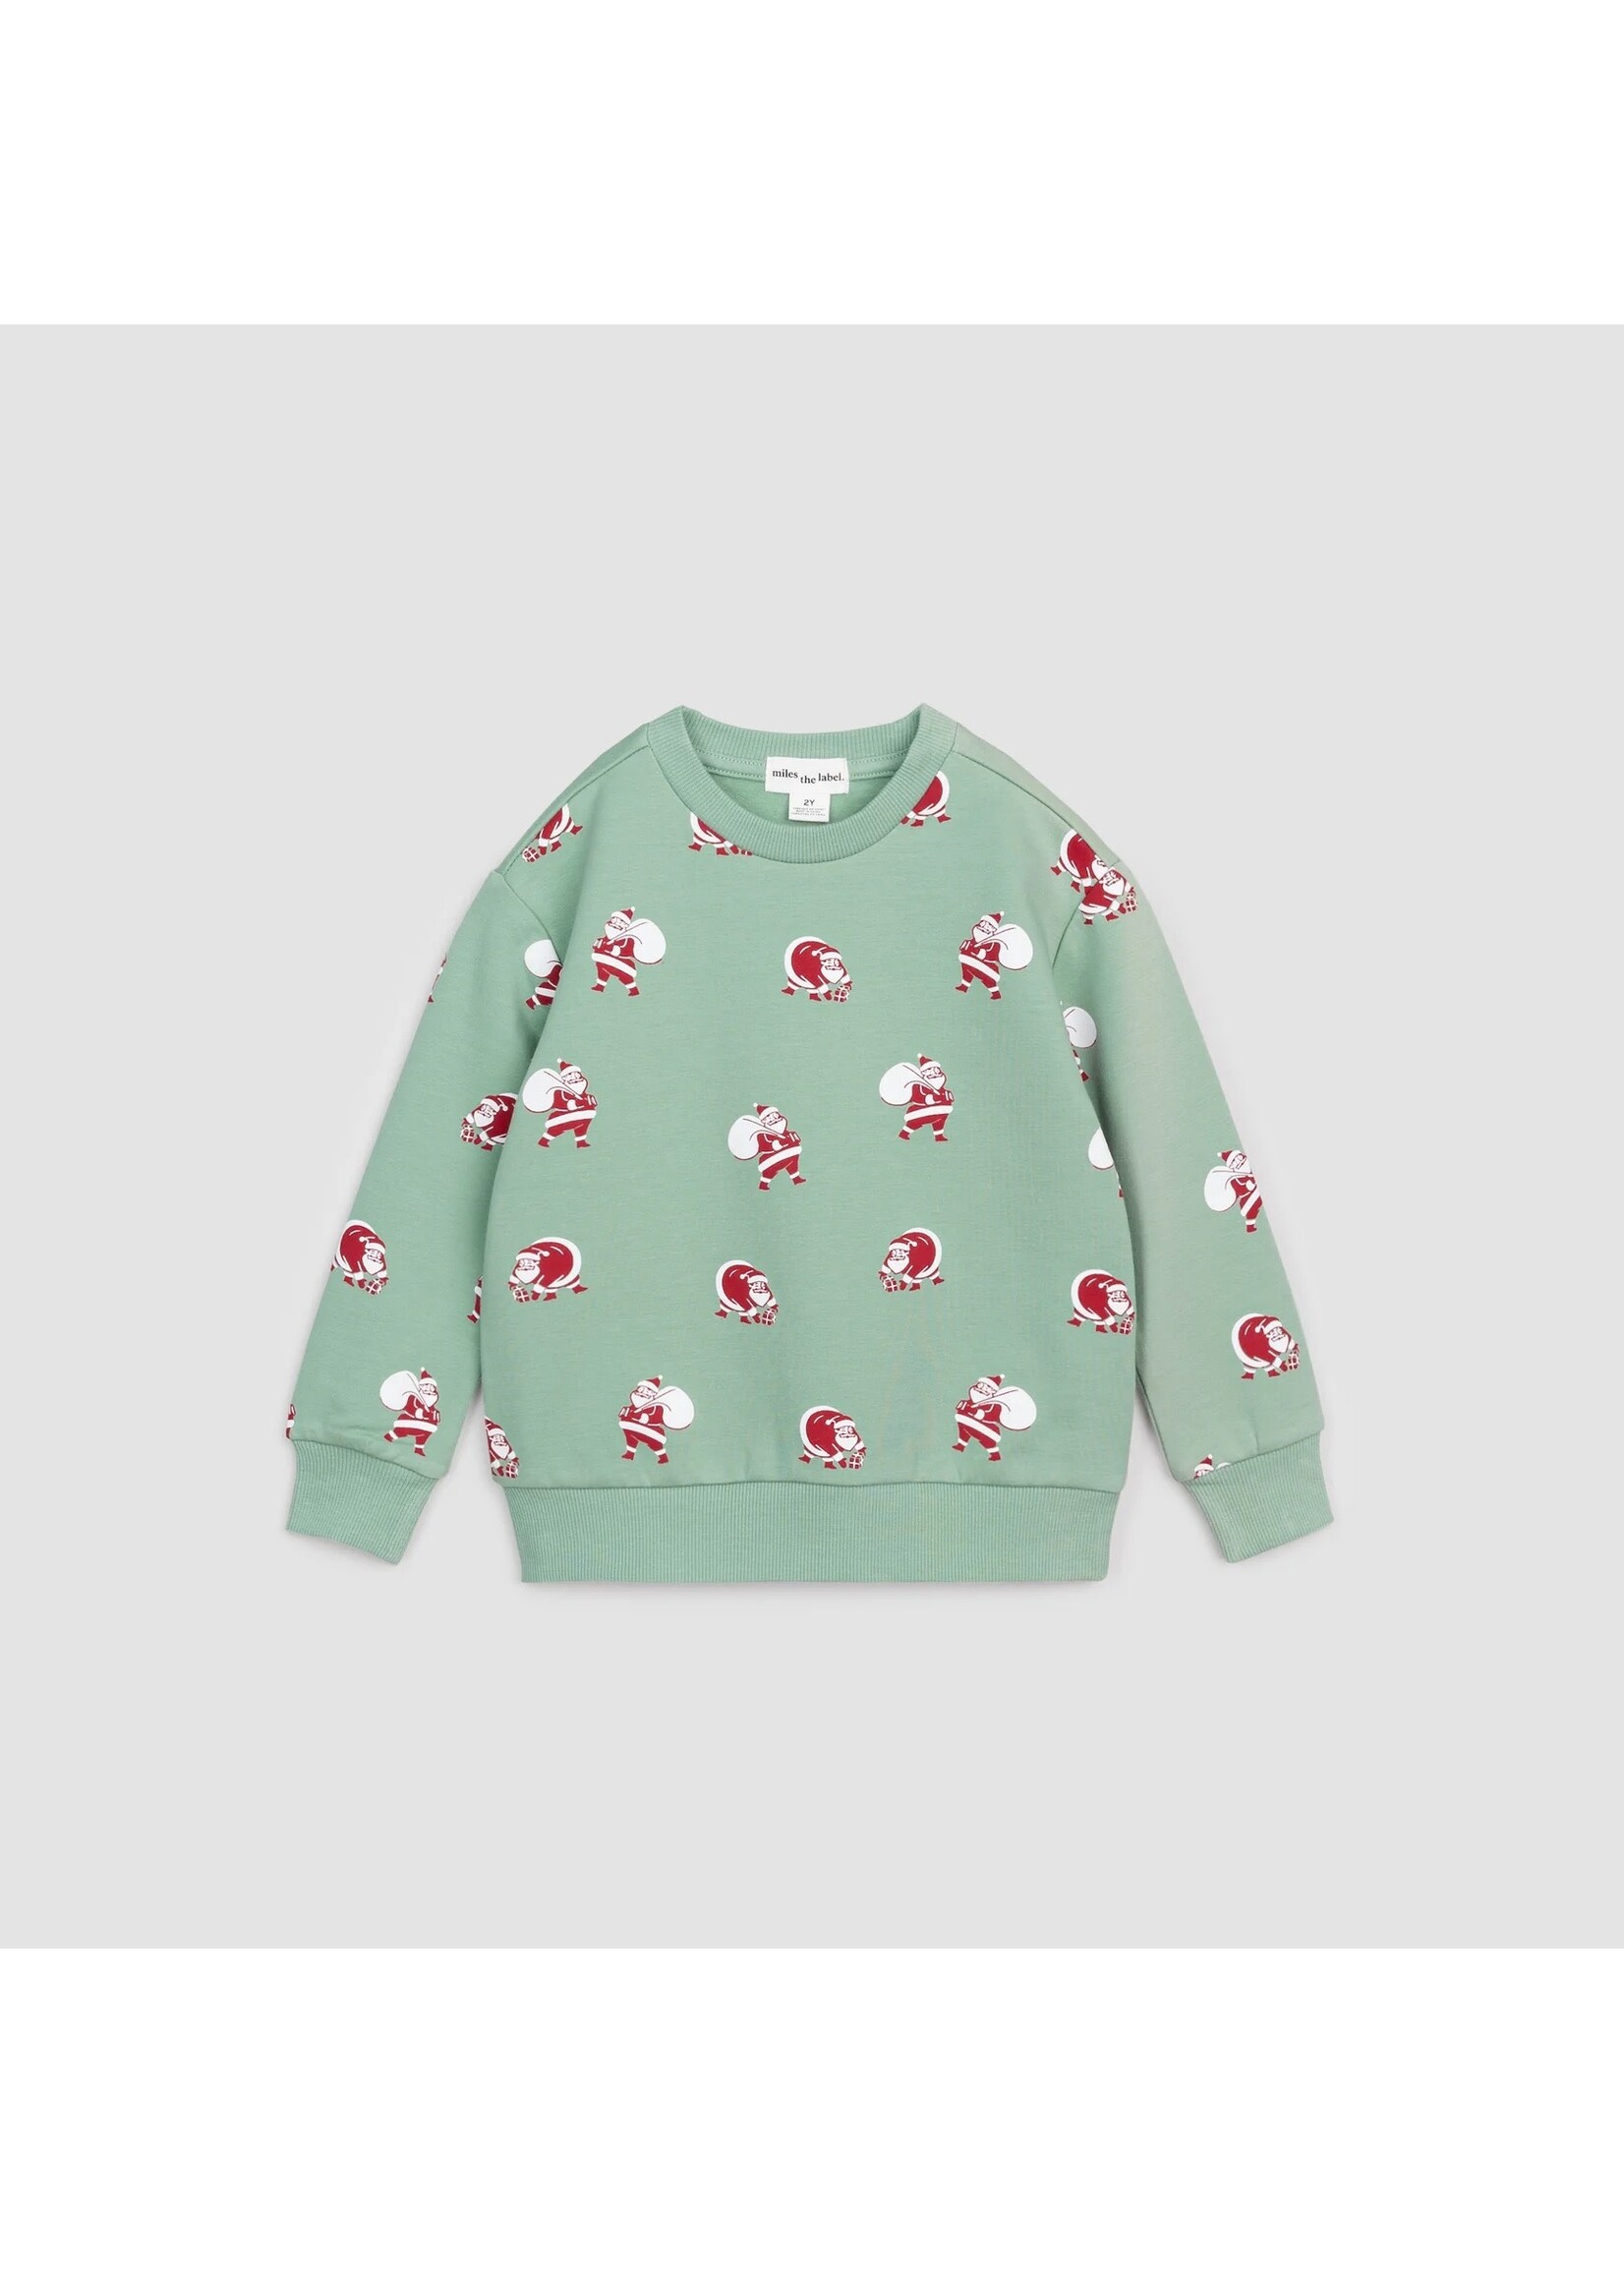 Miles The Label MTL Holly Jolly Santa Sweater